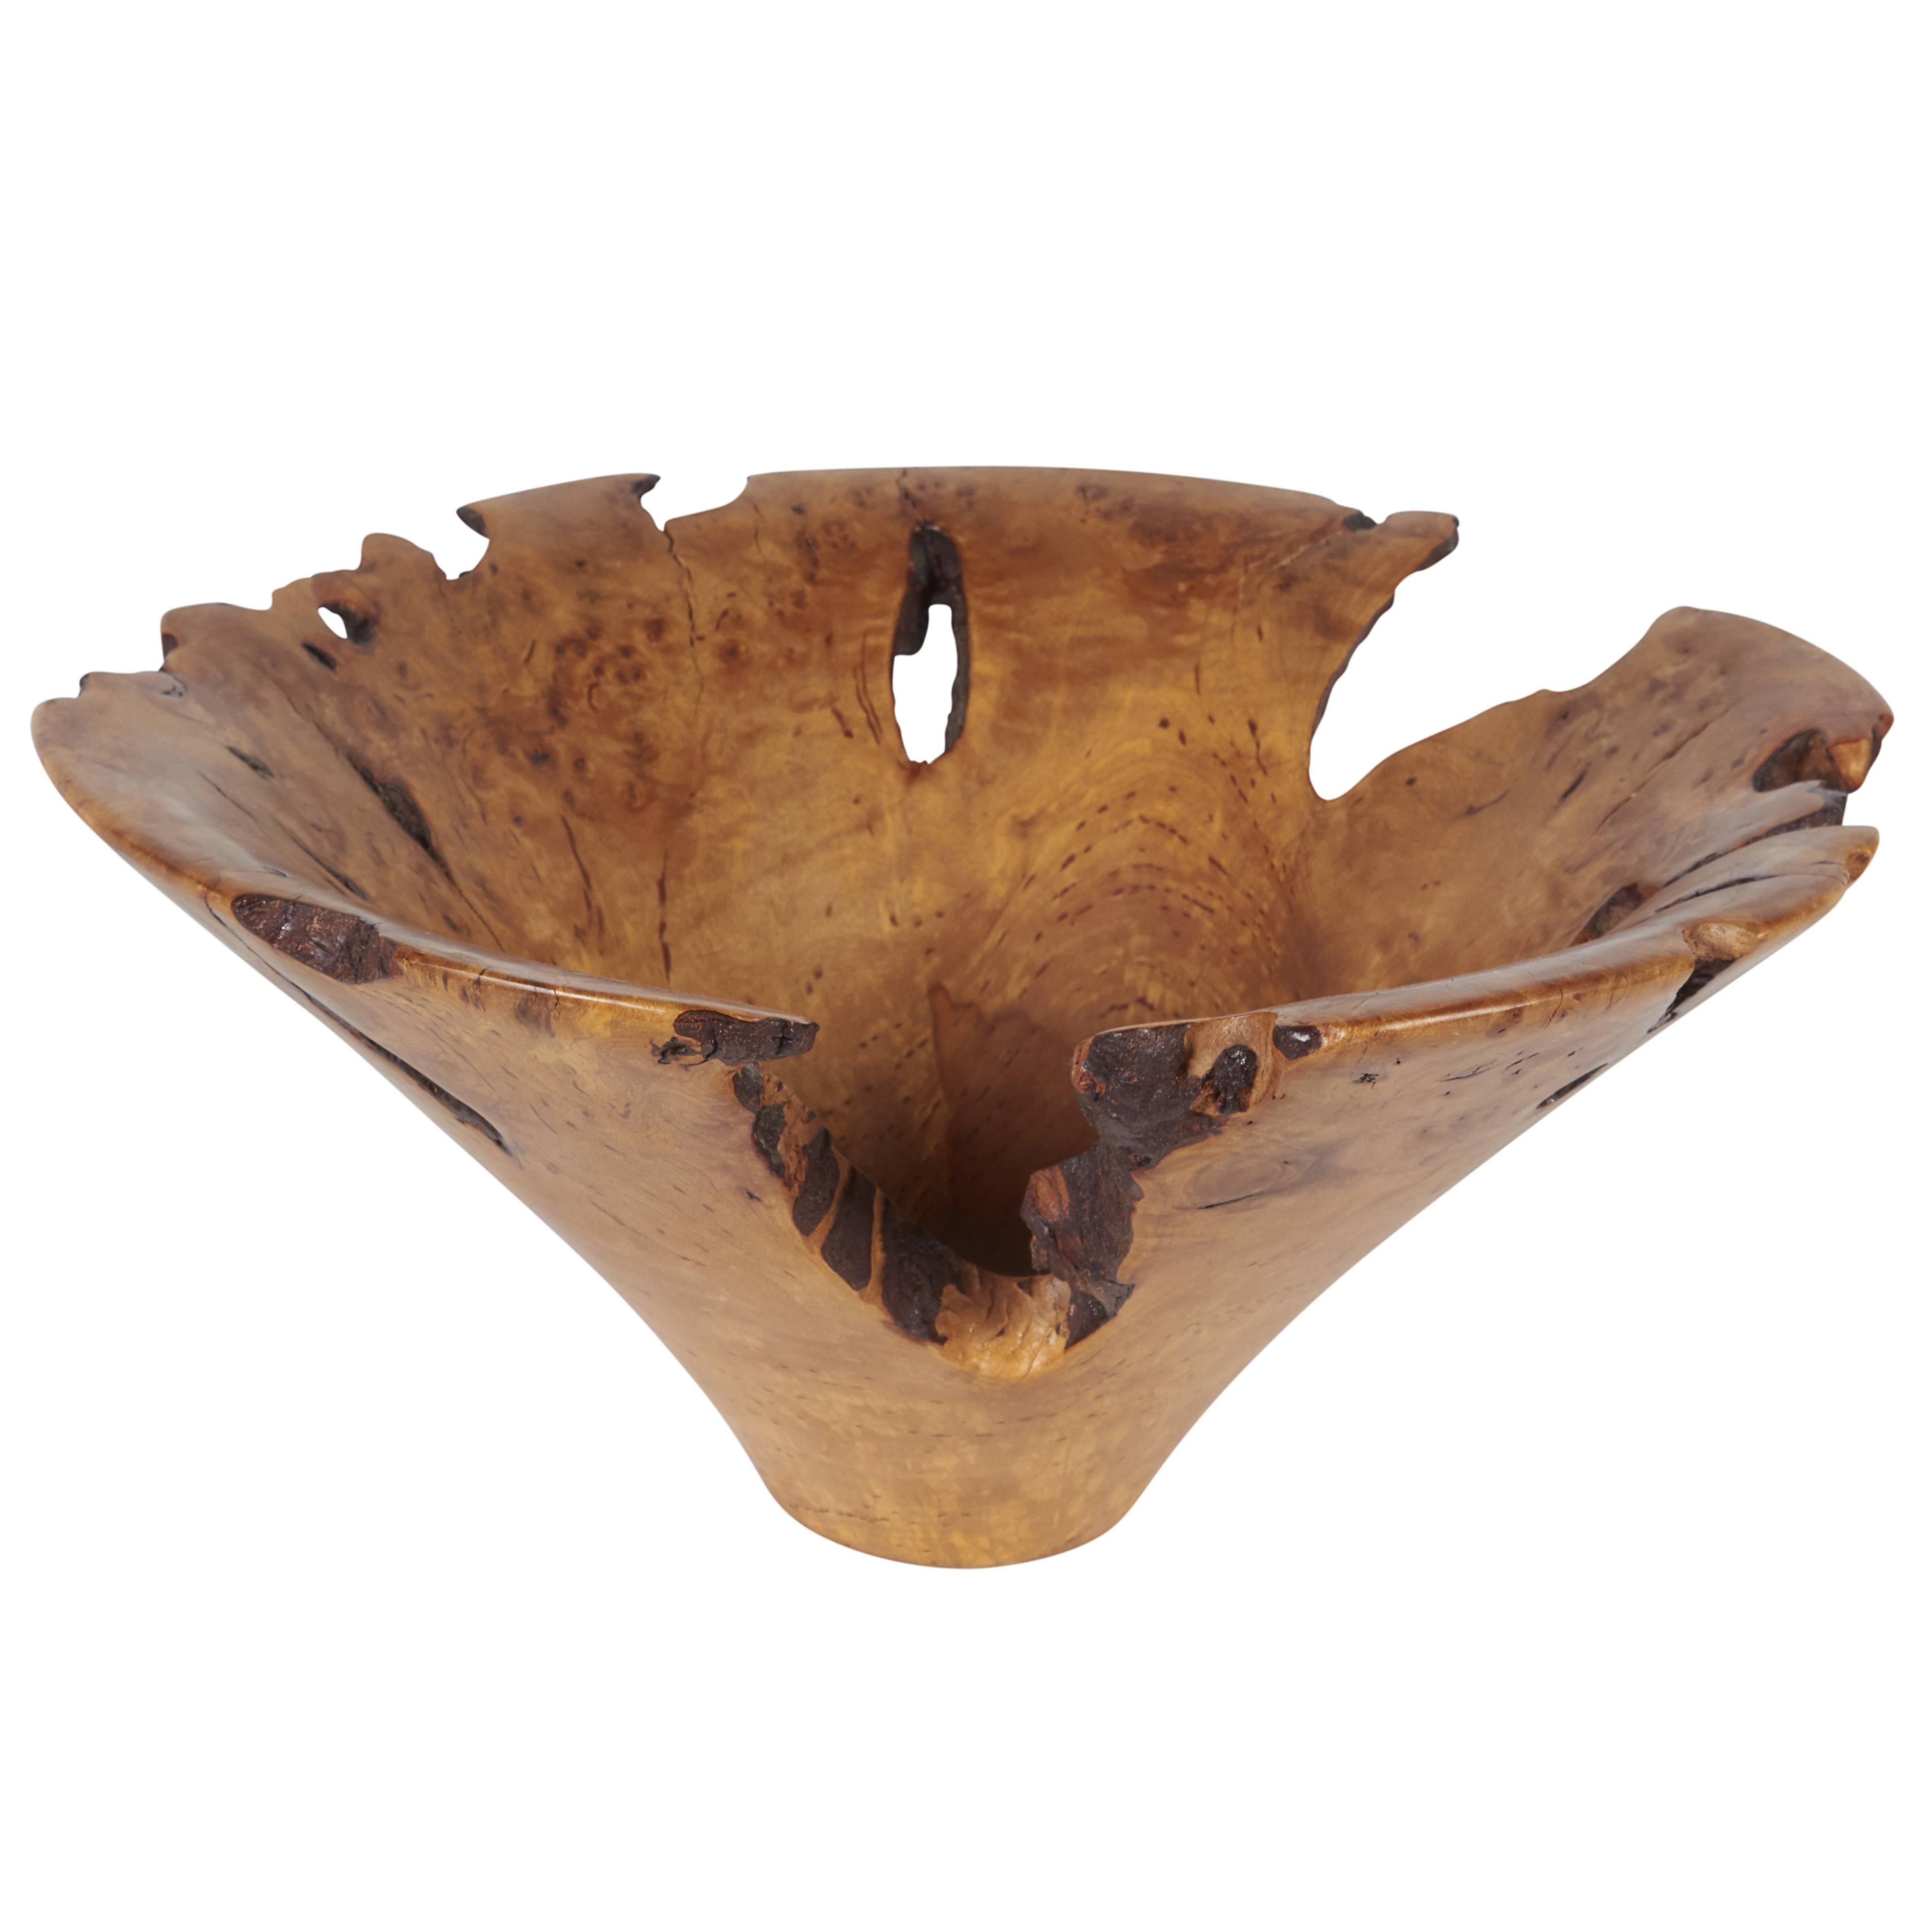 Melvin & Mark Lindquist Birch Root Turned Bowl, Signed & Dated 1986